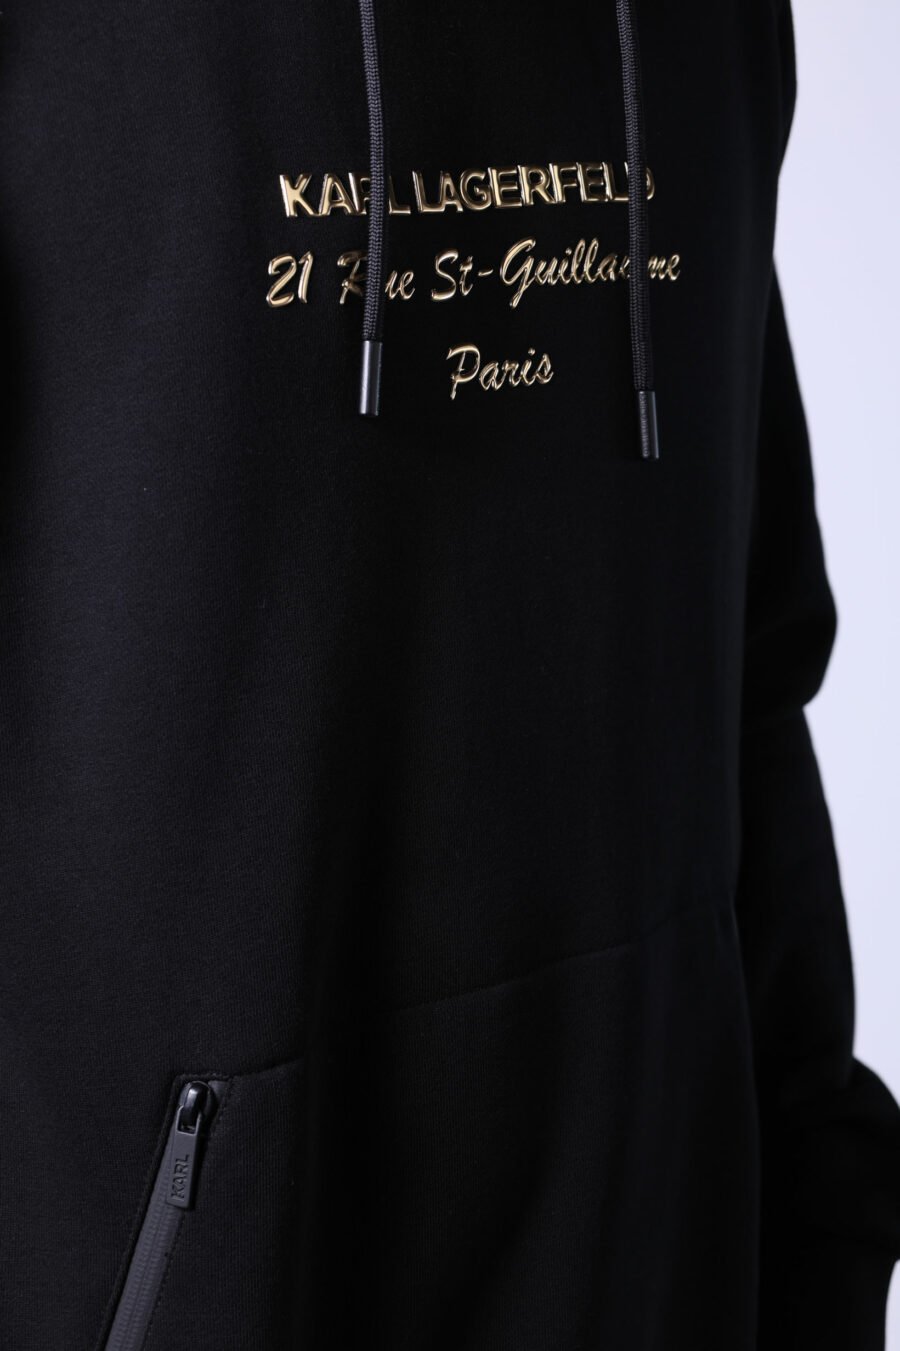 Black hooded sweatshirt with gold lettering "rue st guillaume" logo - Untitled Catalog 05729